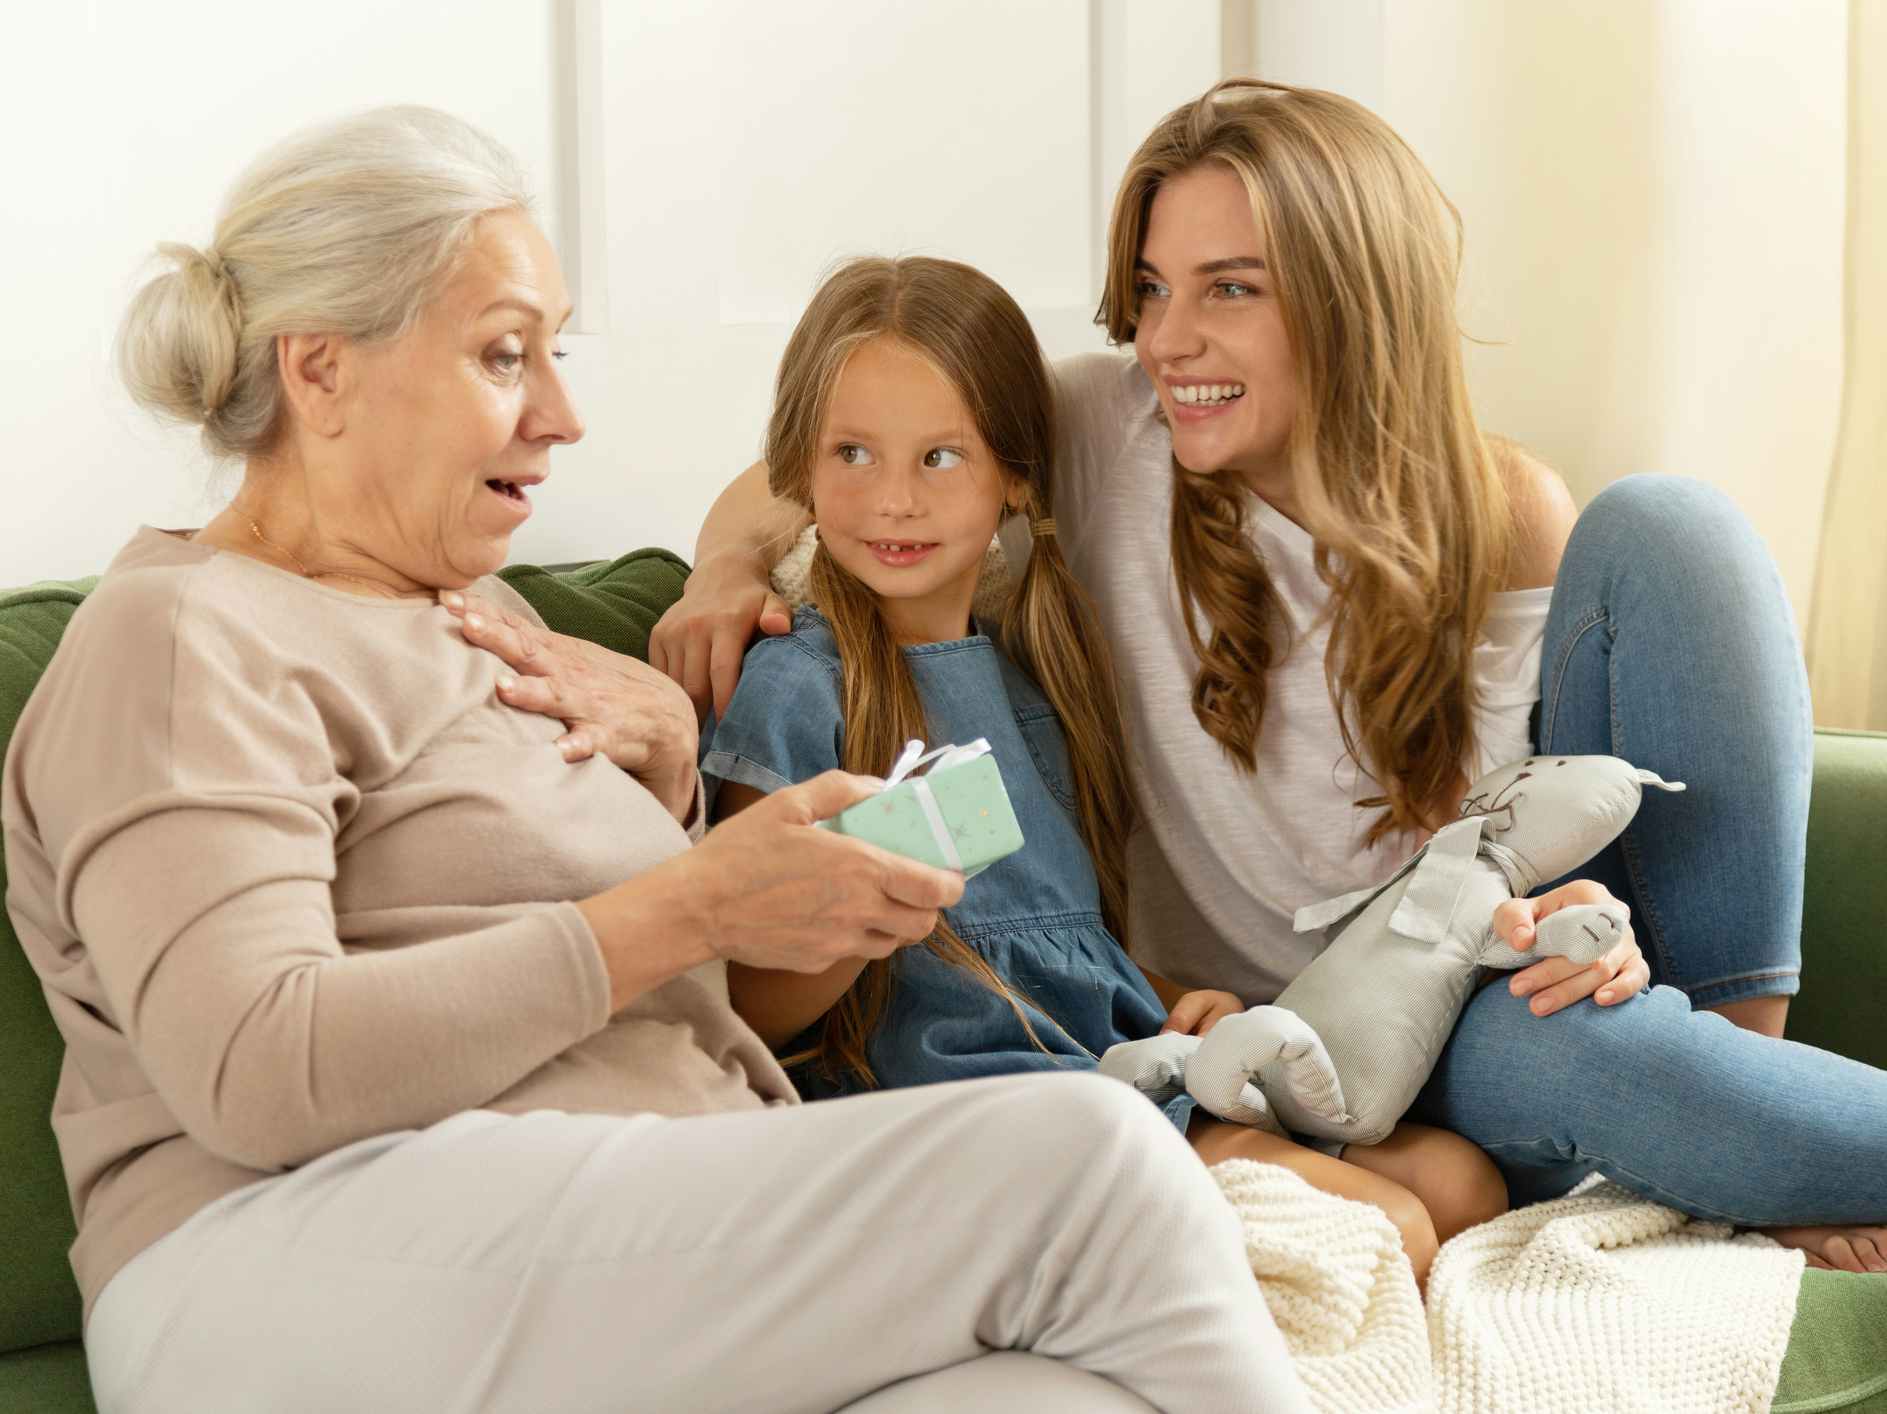 A grandmother opening a gift and looking surprised while her daughter and grand daughter watch and smile